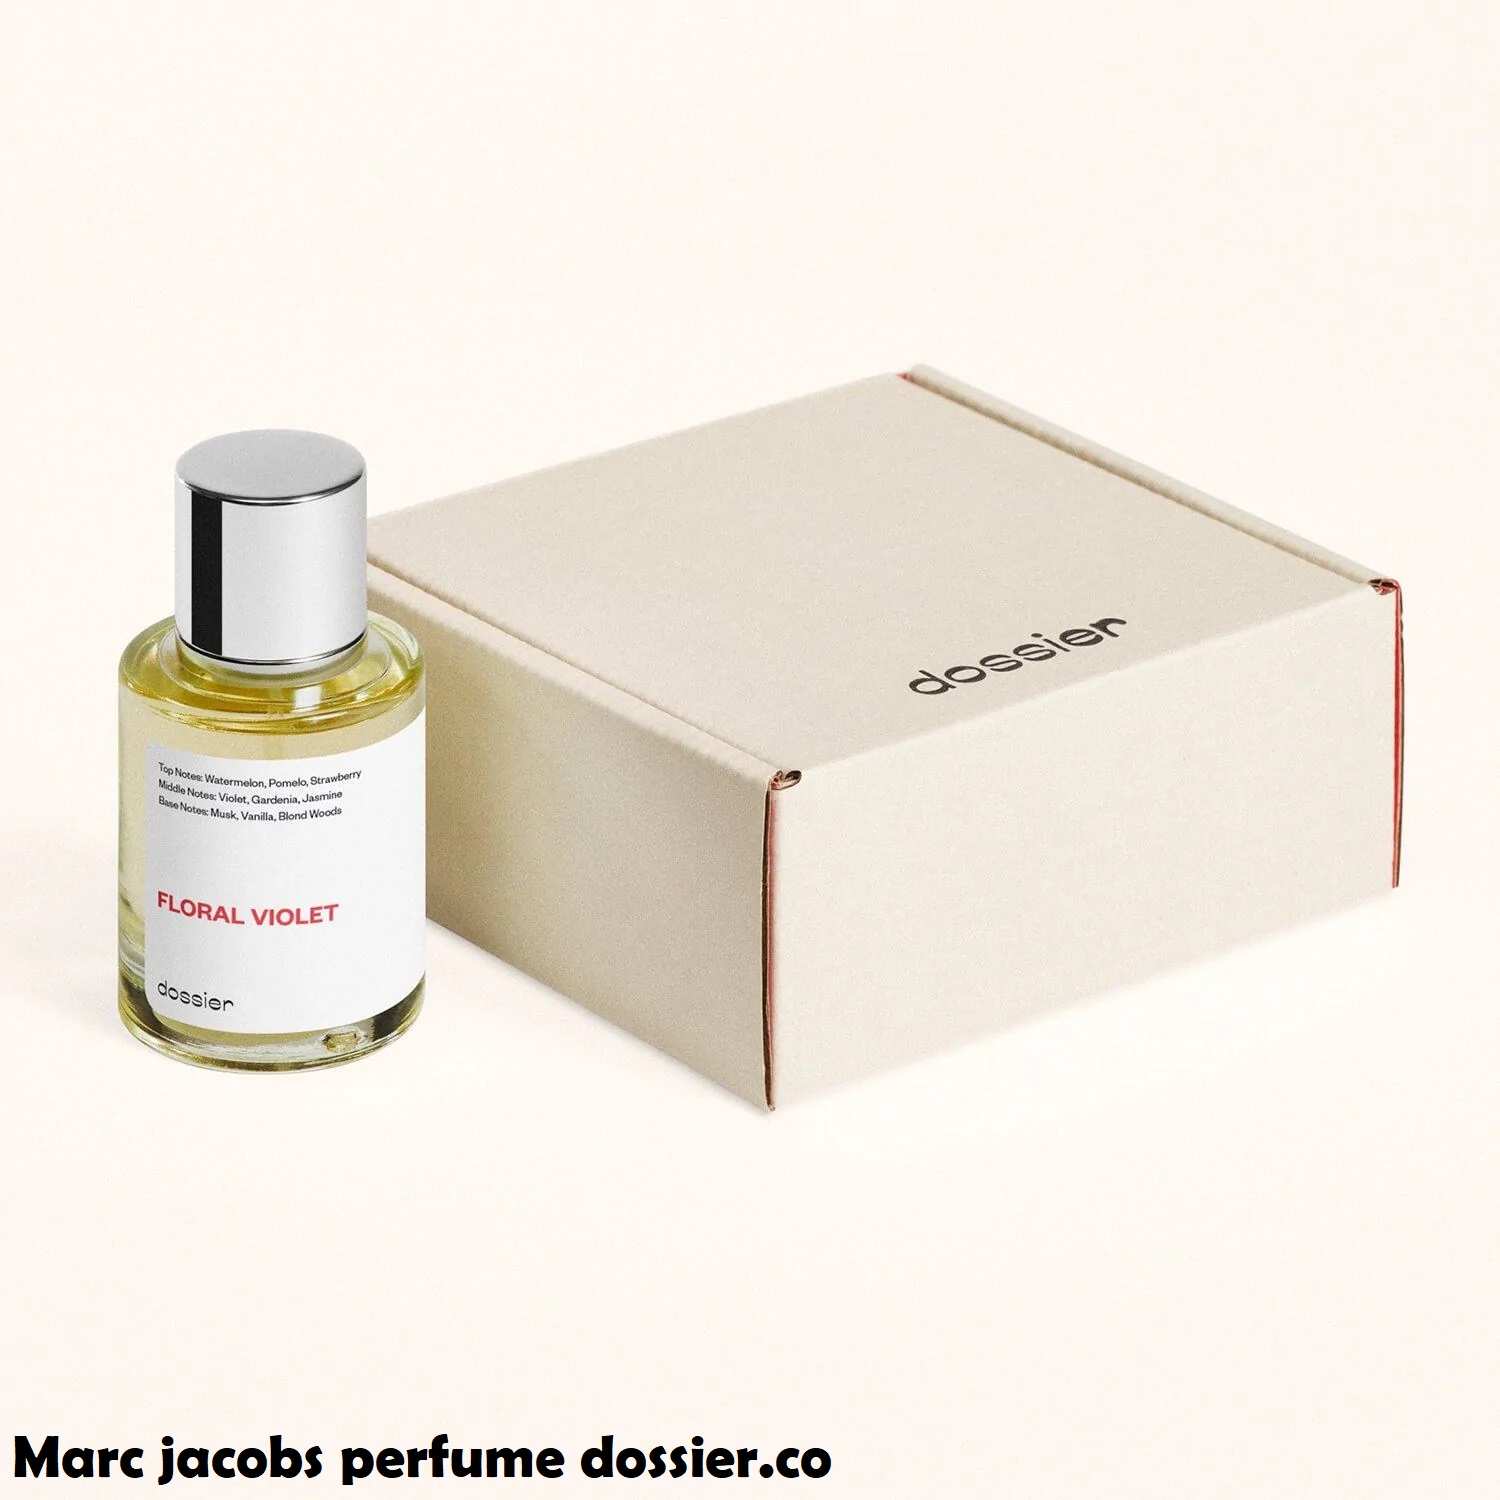 Marc jacobs perfume dossier.co